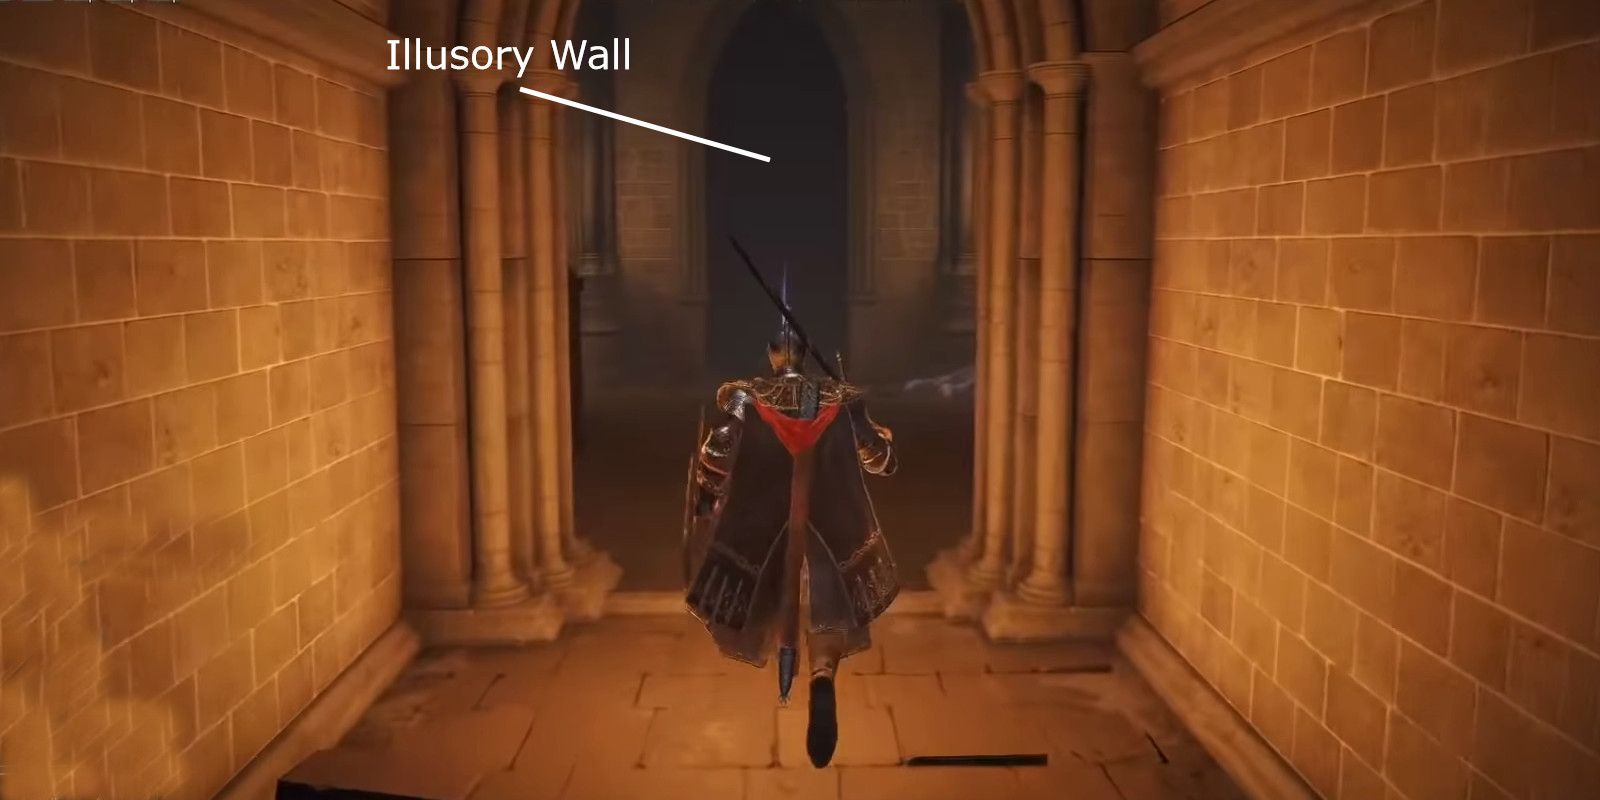 An image of an Elden Ring player inside the Academy of Raya Lucaria with an illusory wall highlighted